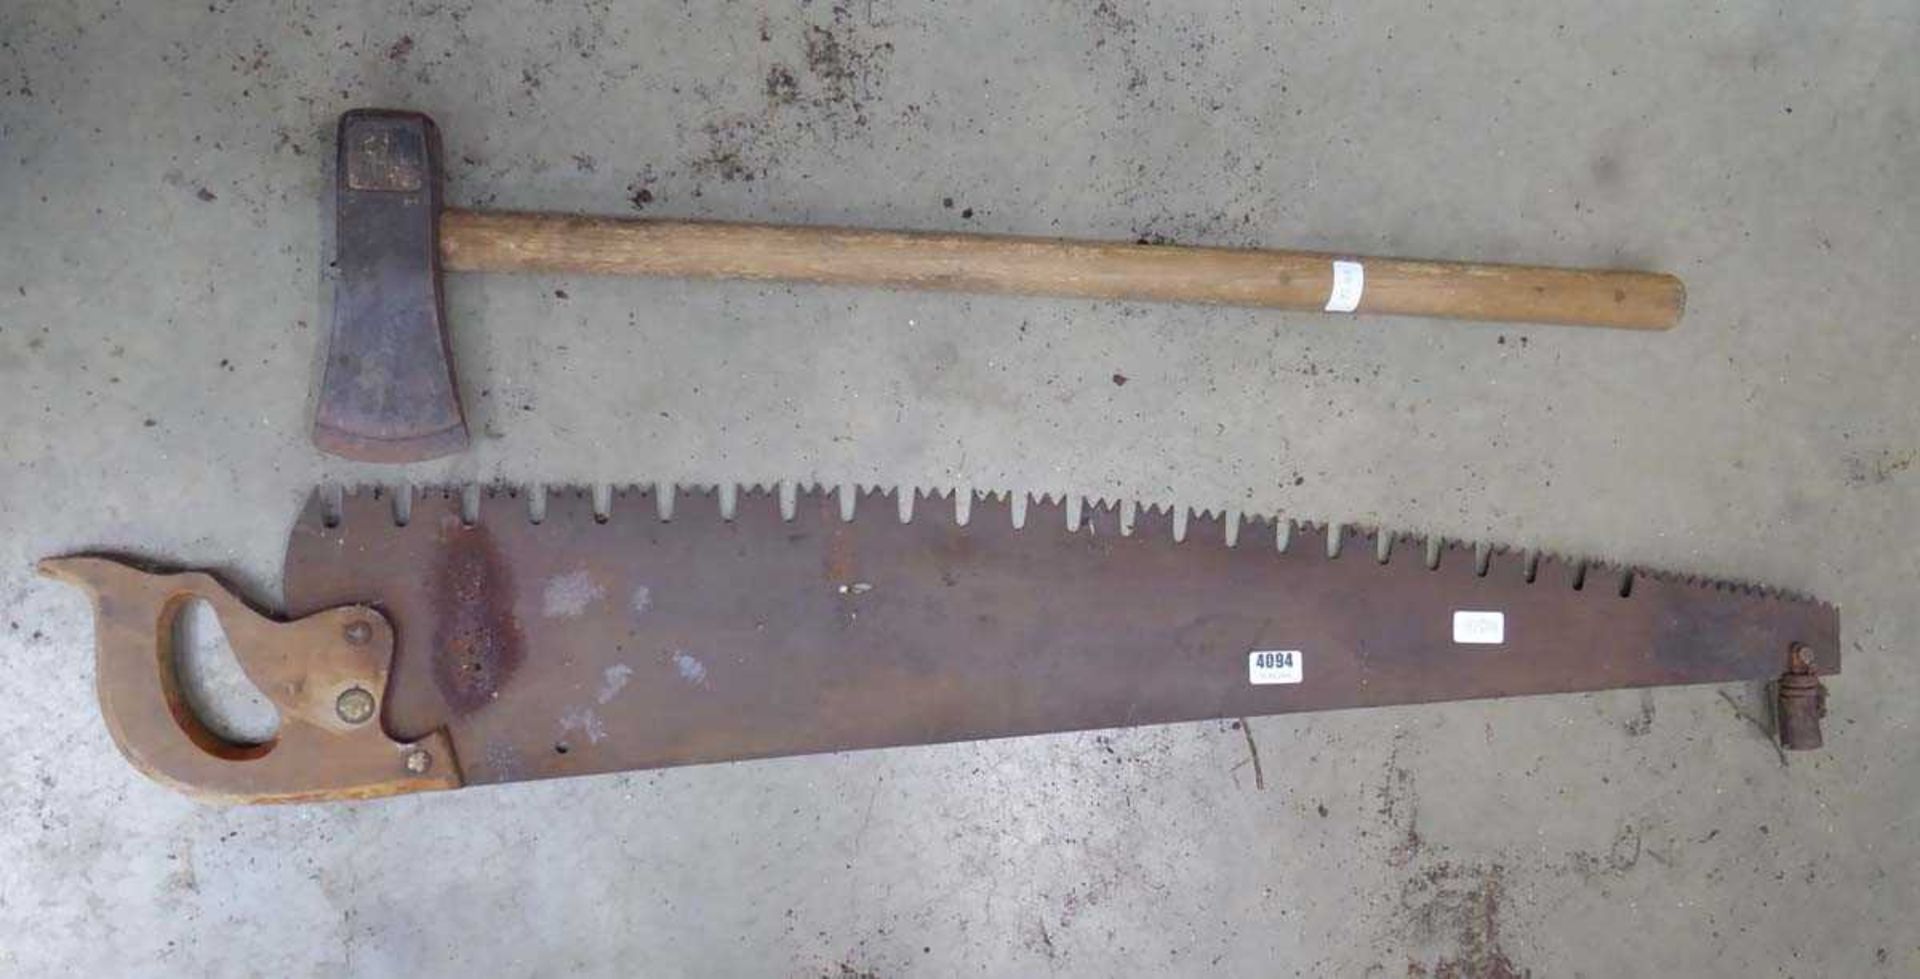 Axe and a large saw